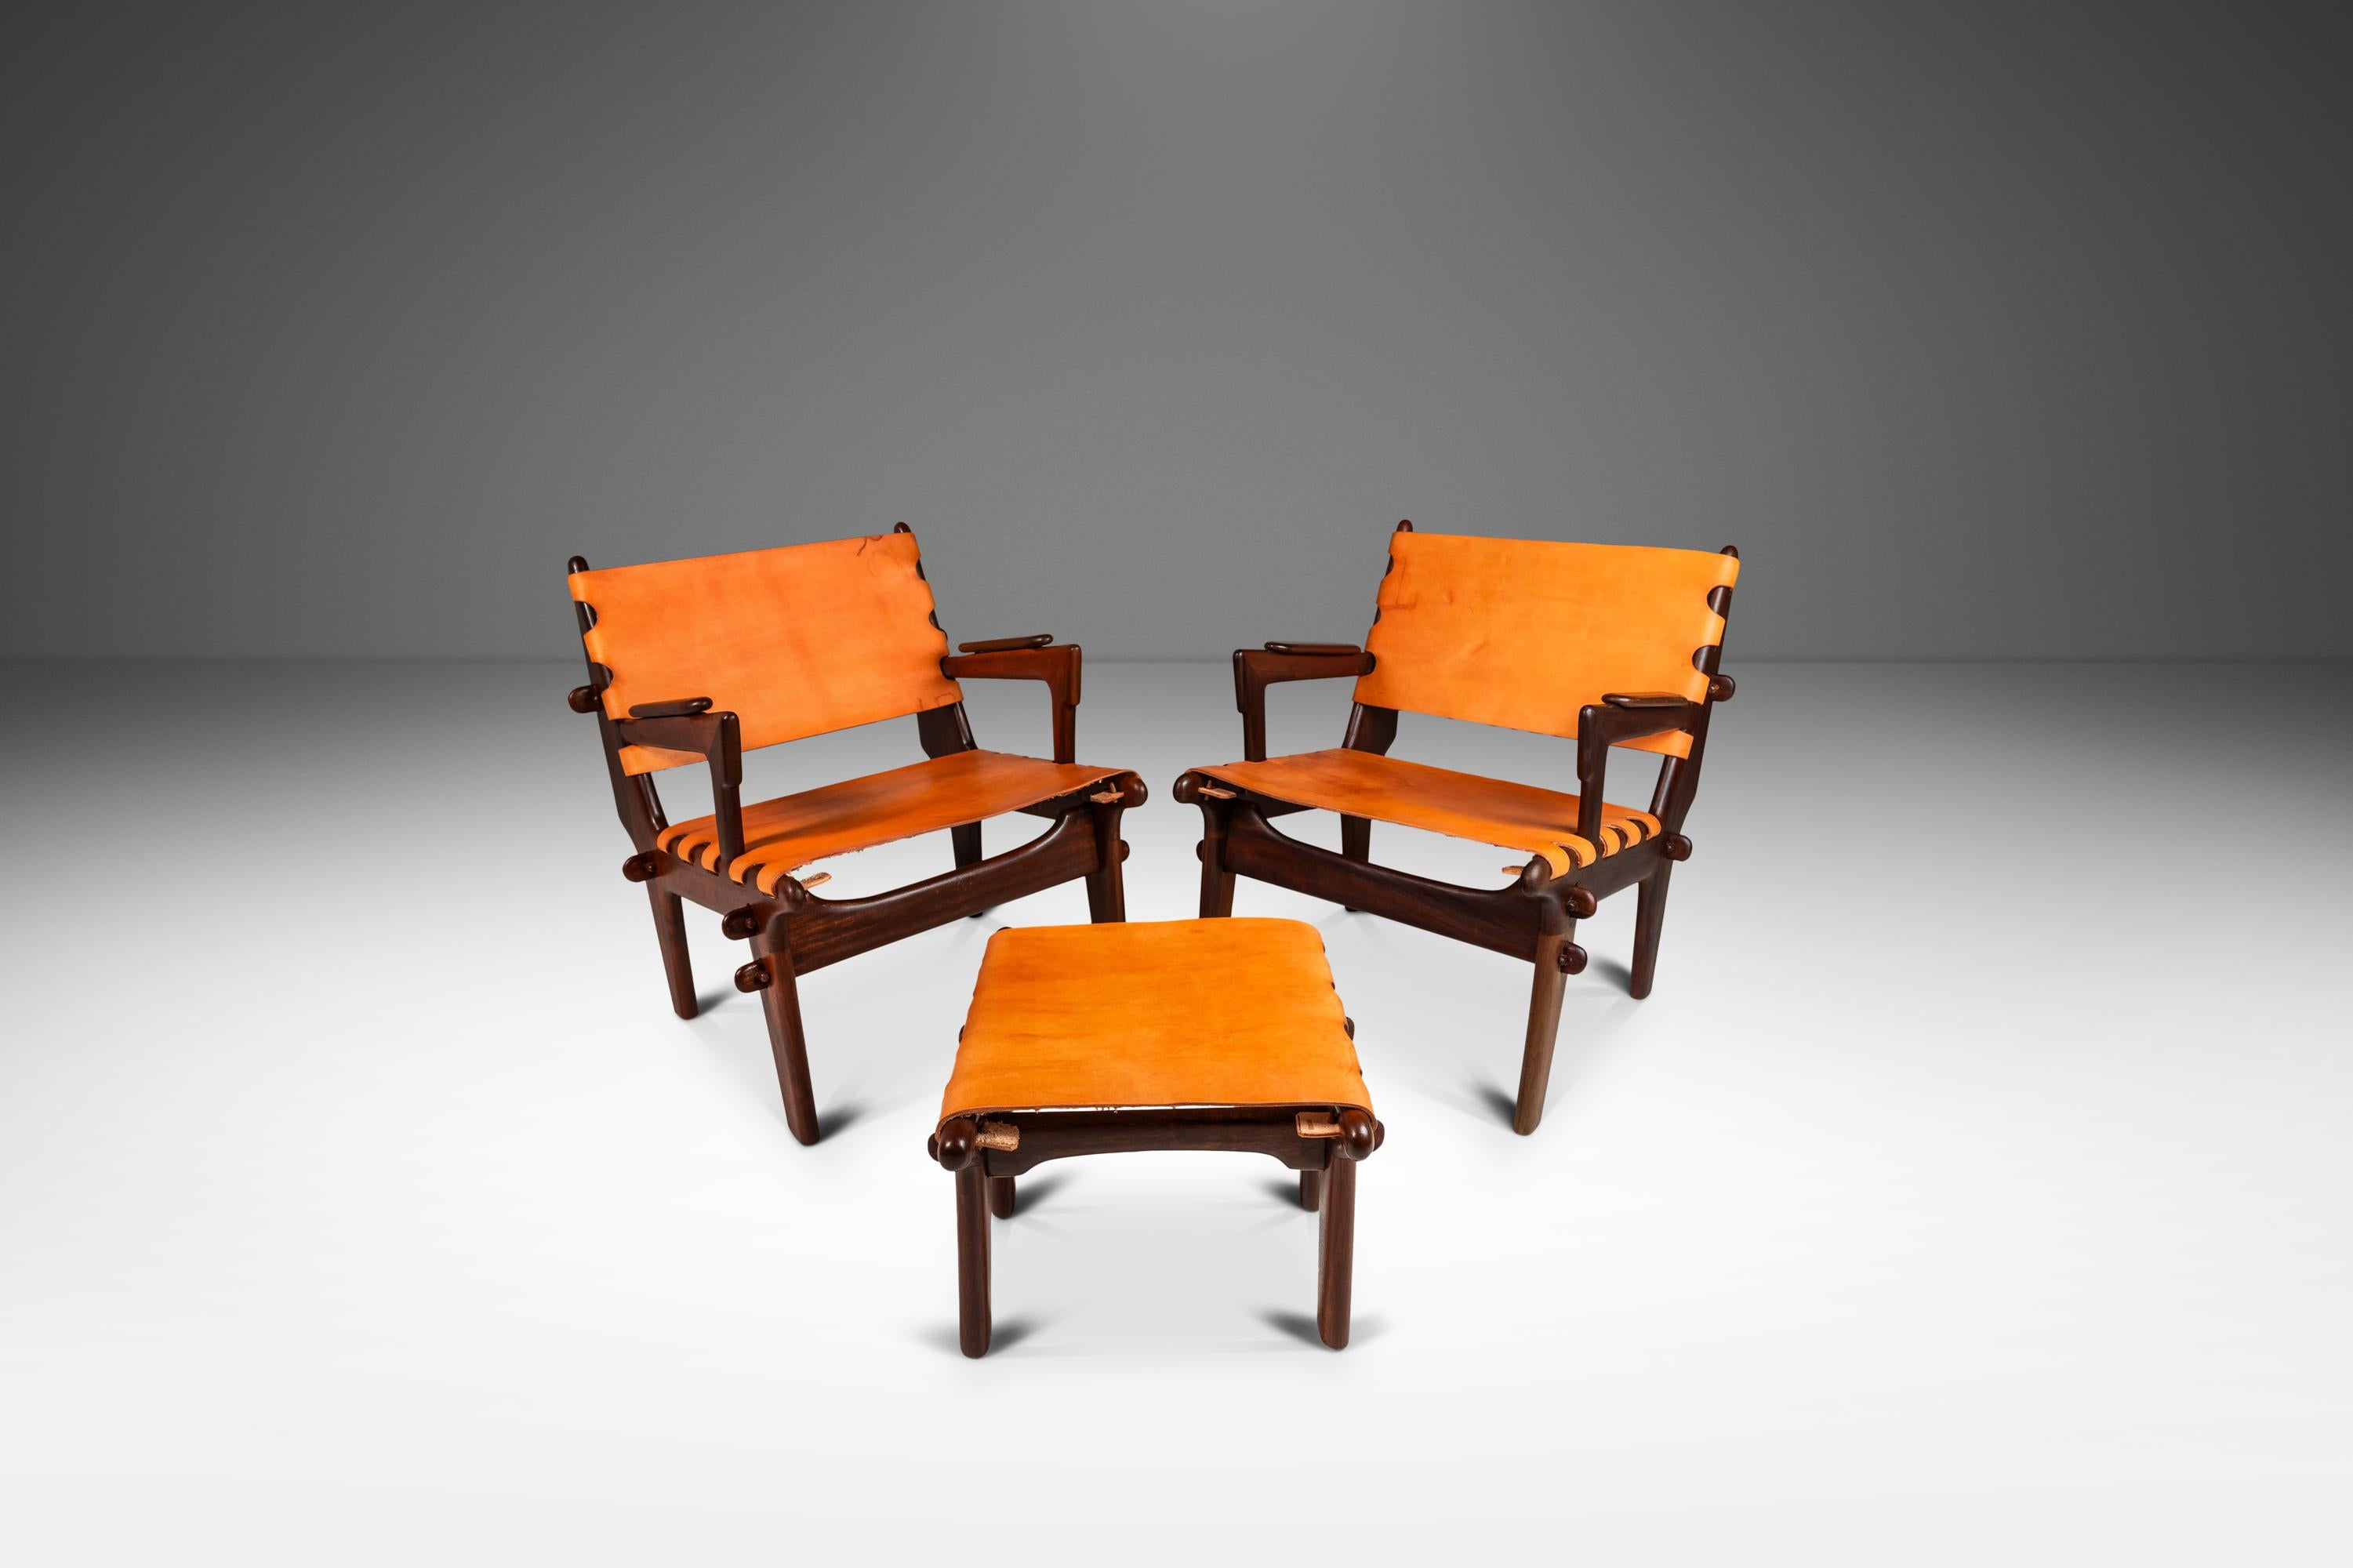 Ecuadorean Set of 2 Tooled Leather Sling Lounge Chairs by Angel Pazmi, Ecuador, c. 1960's For Sale